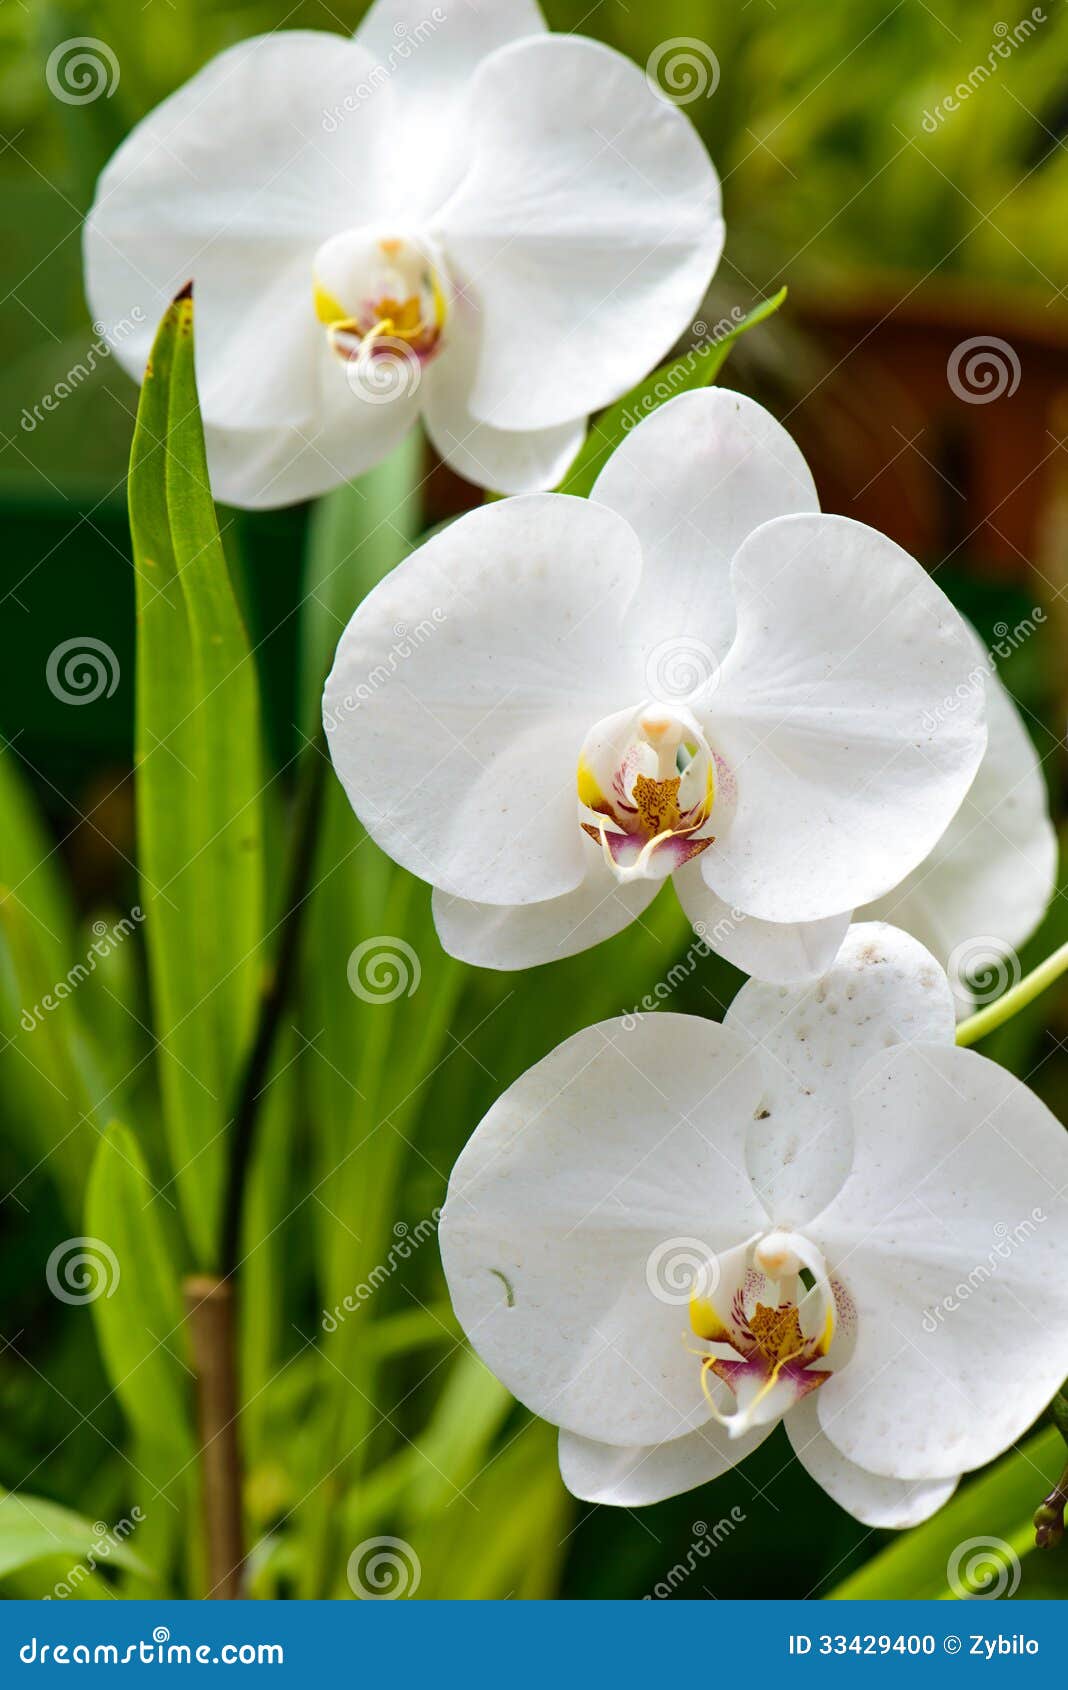 Types Of Orchids